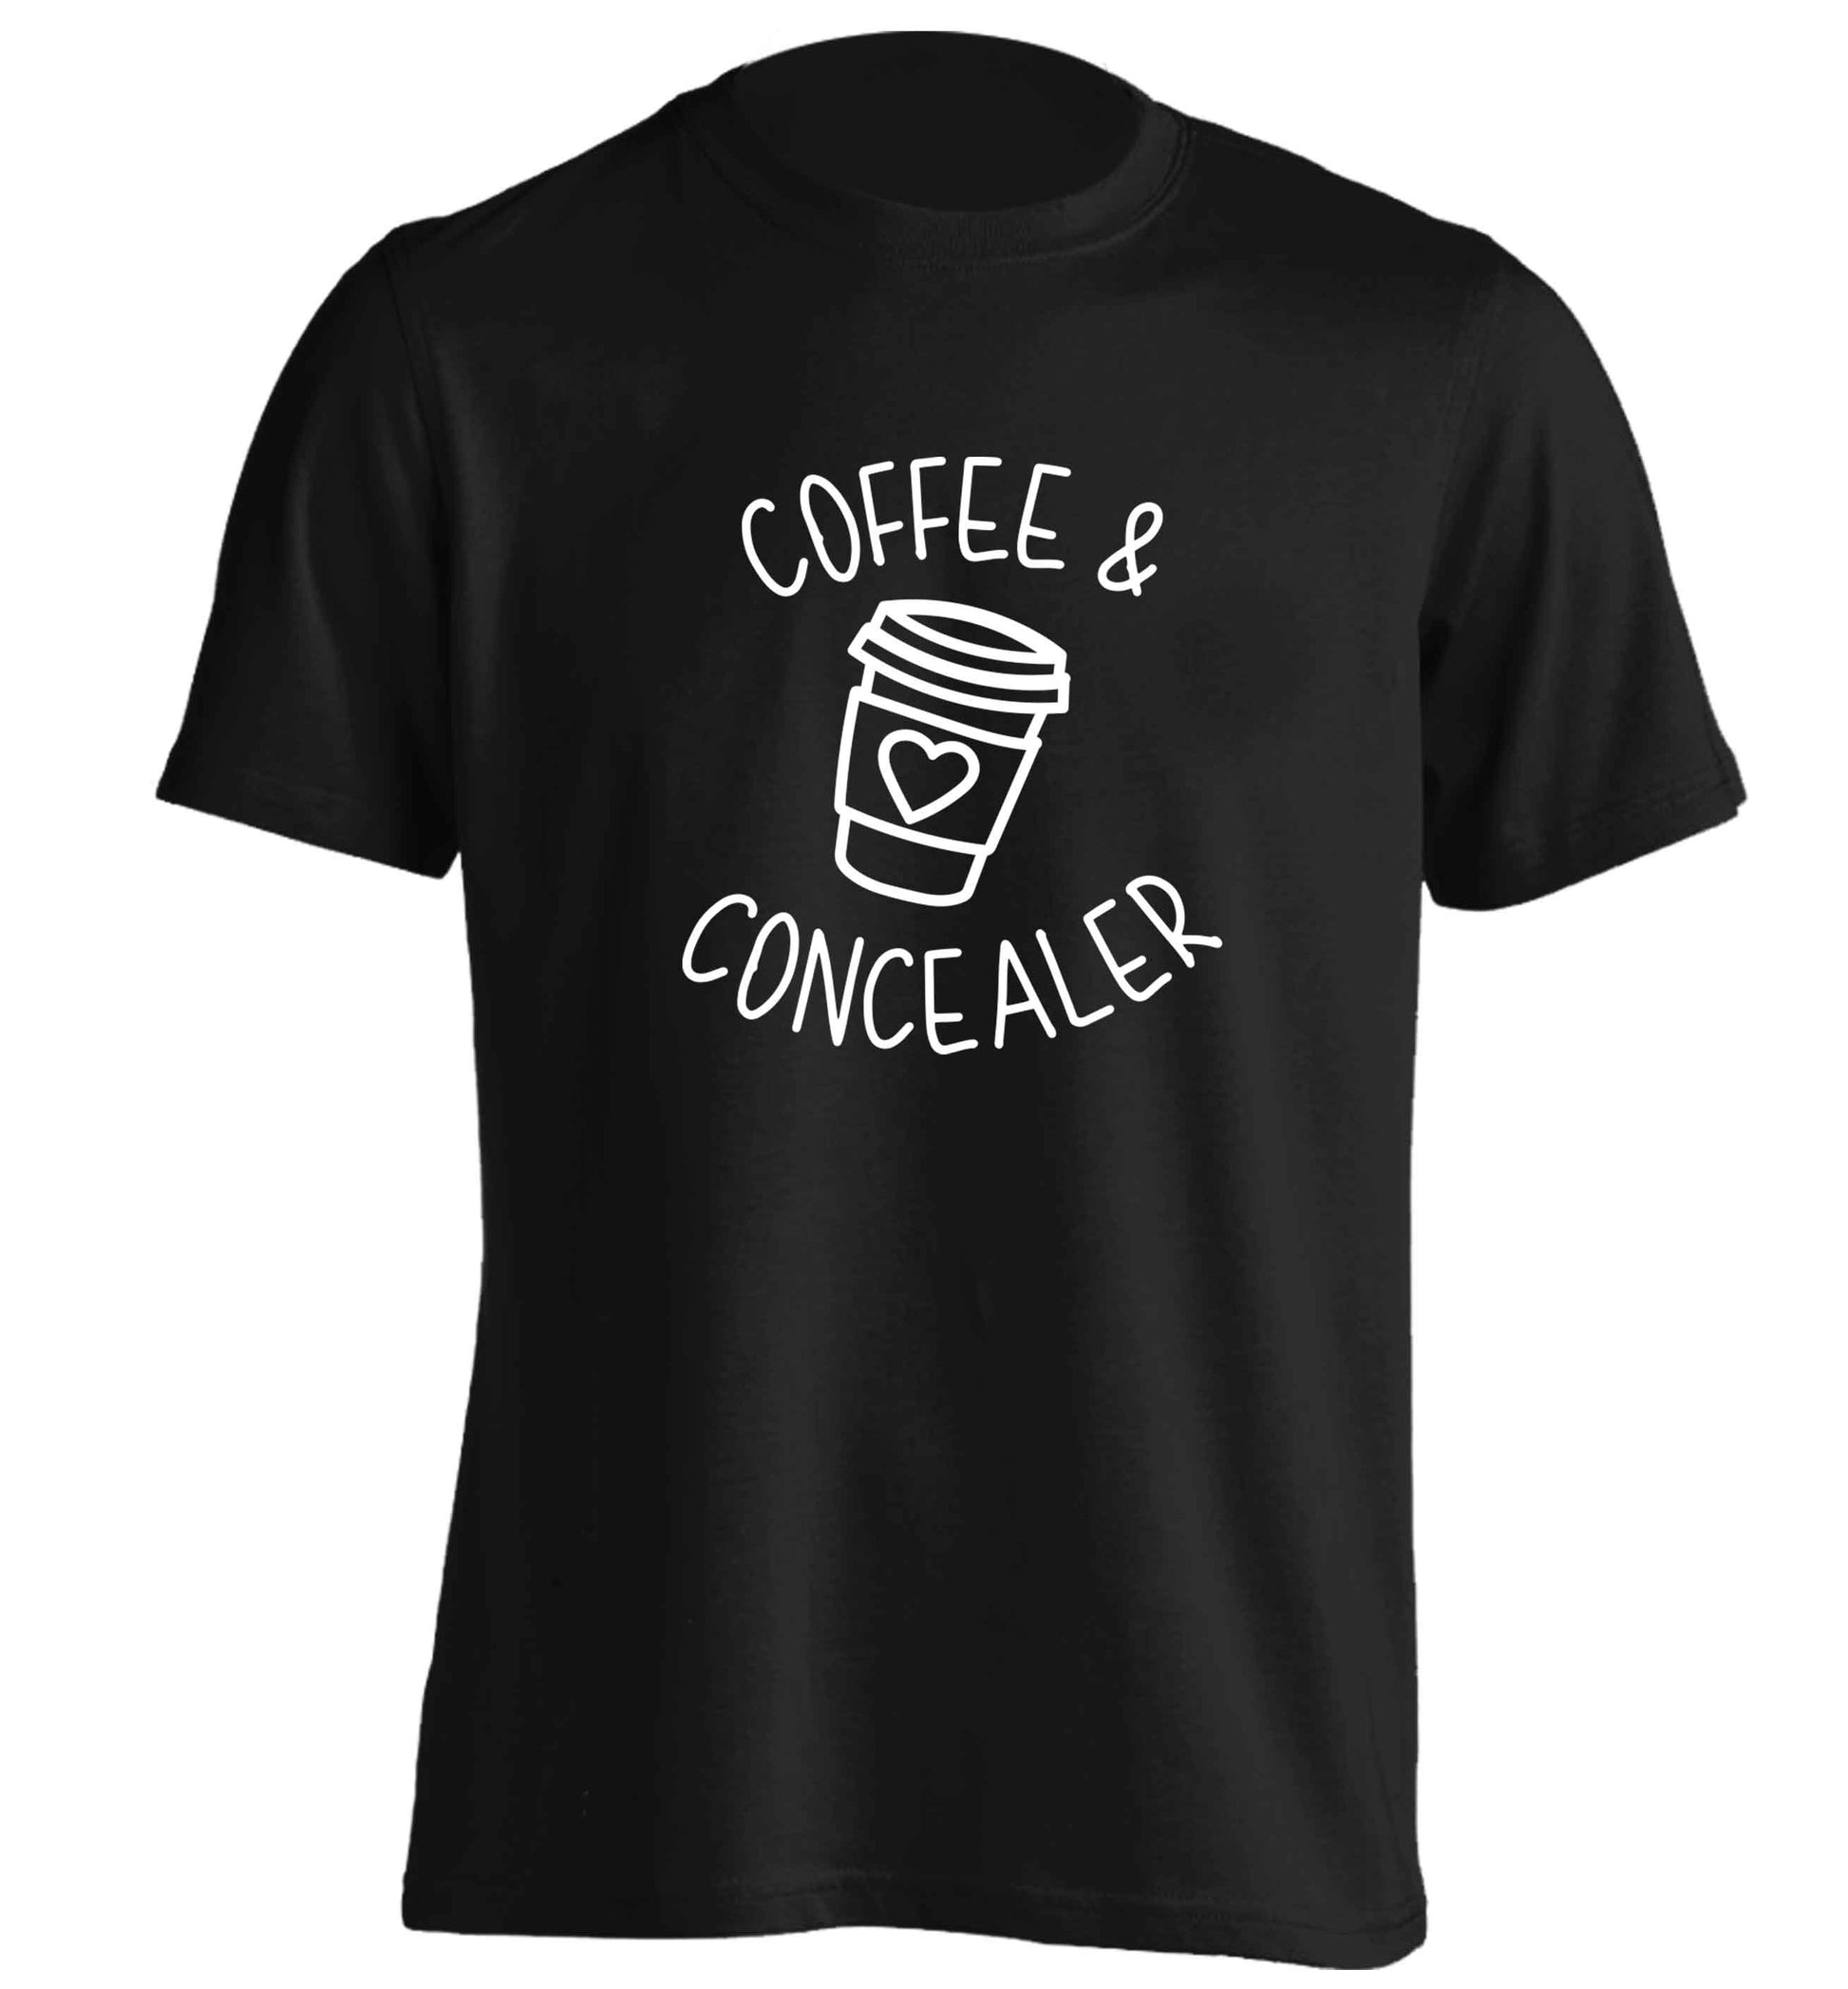 Coffee and concealer adults unisex black Tshirt 2XL